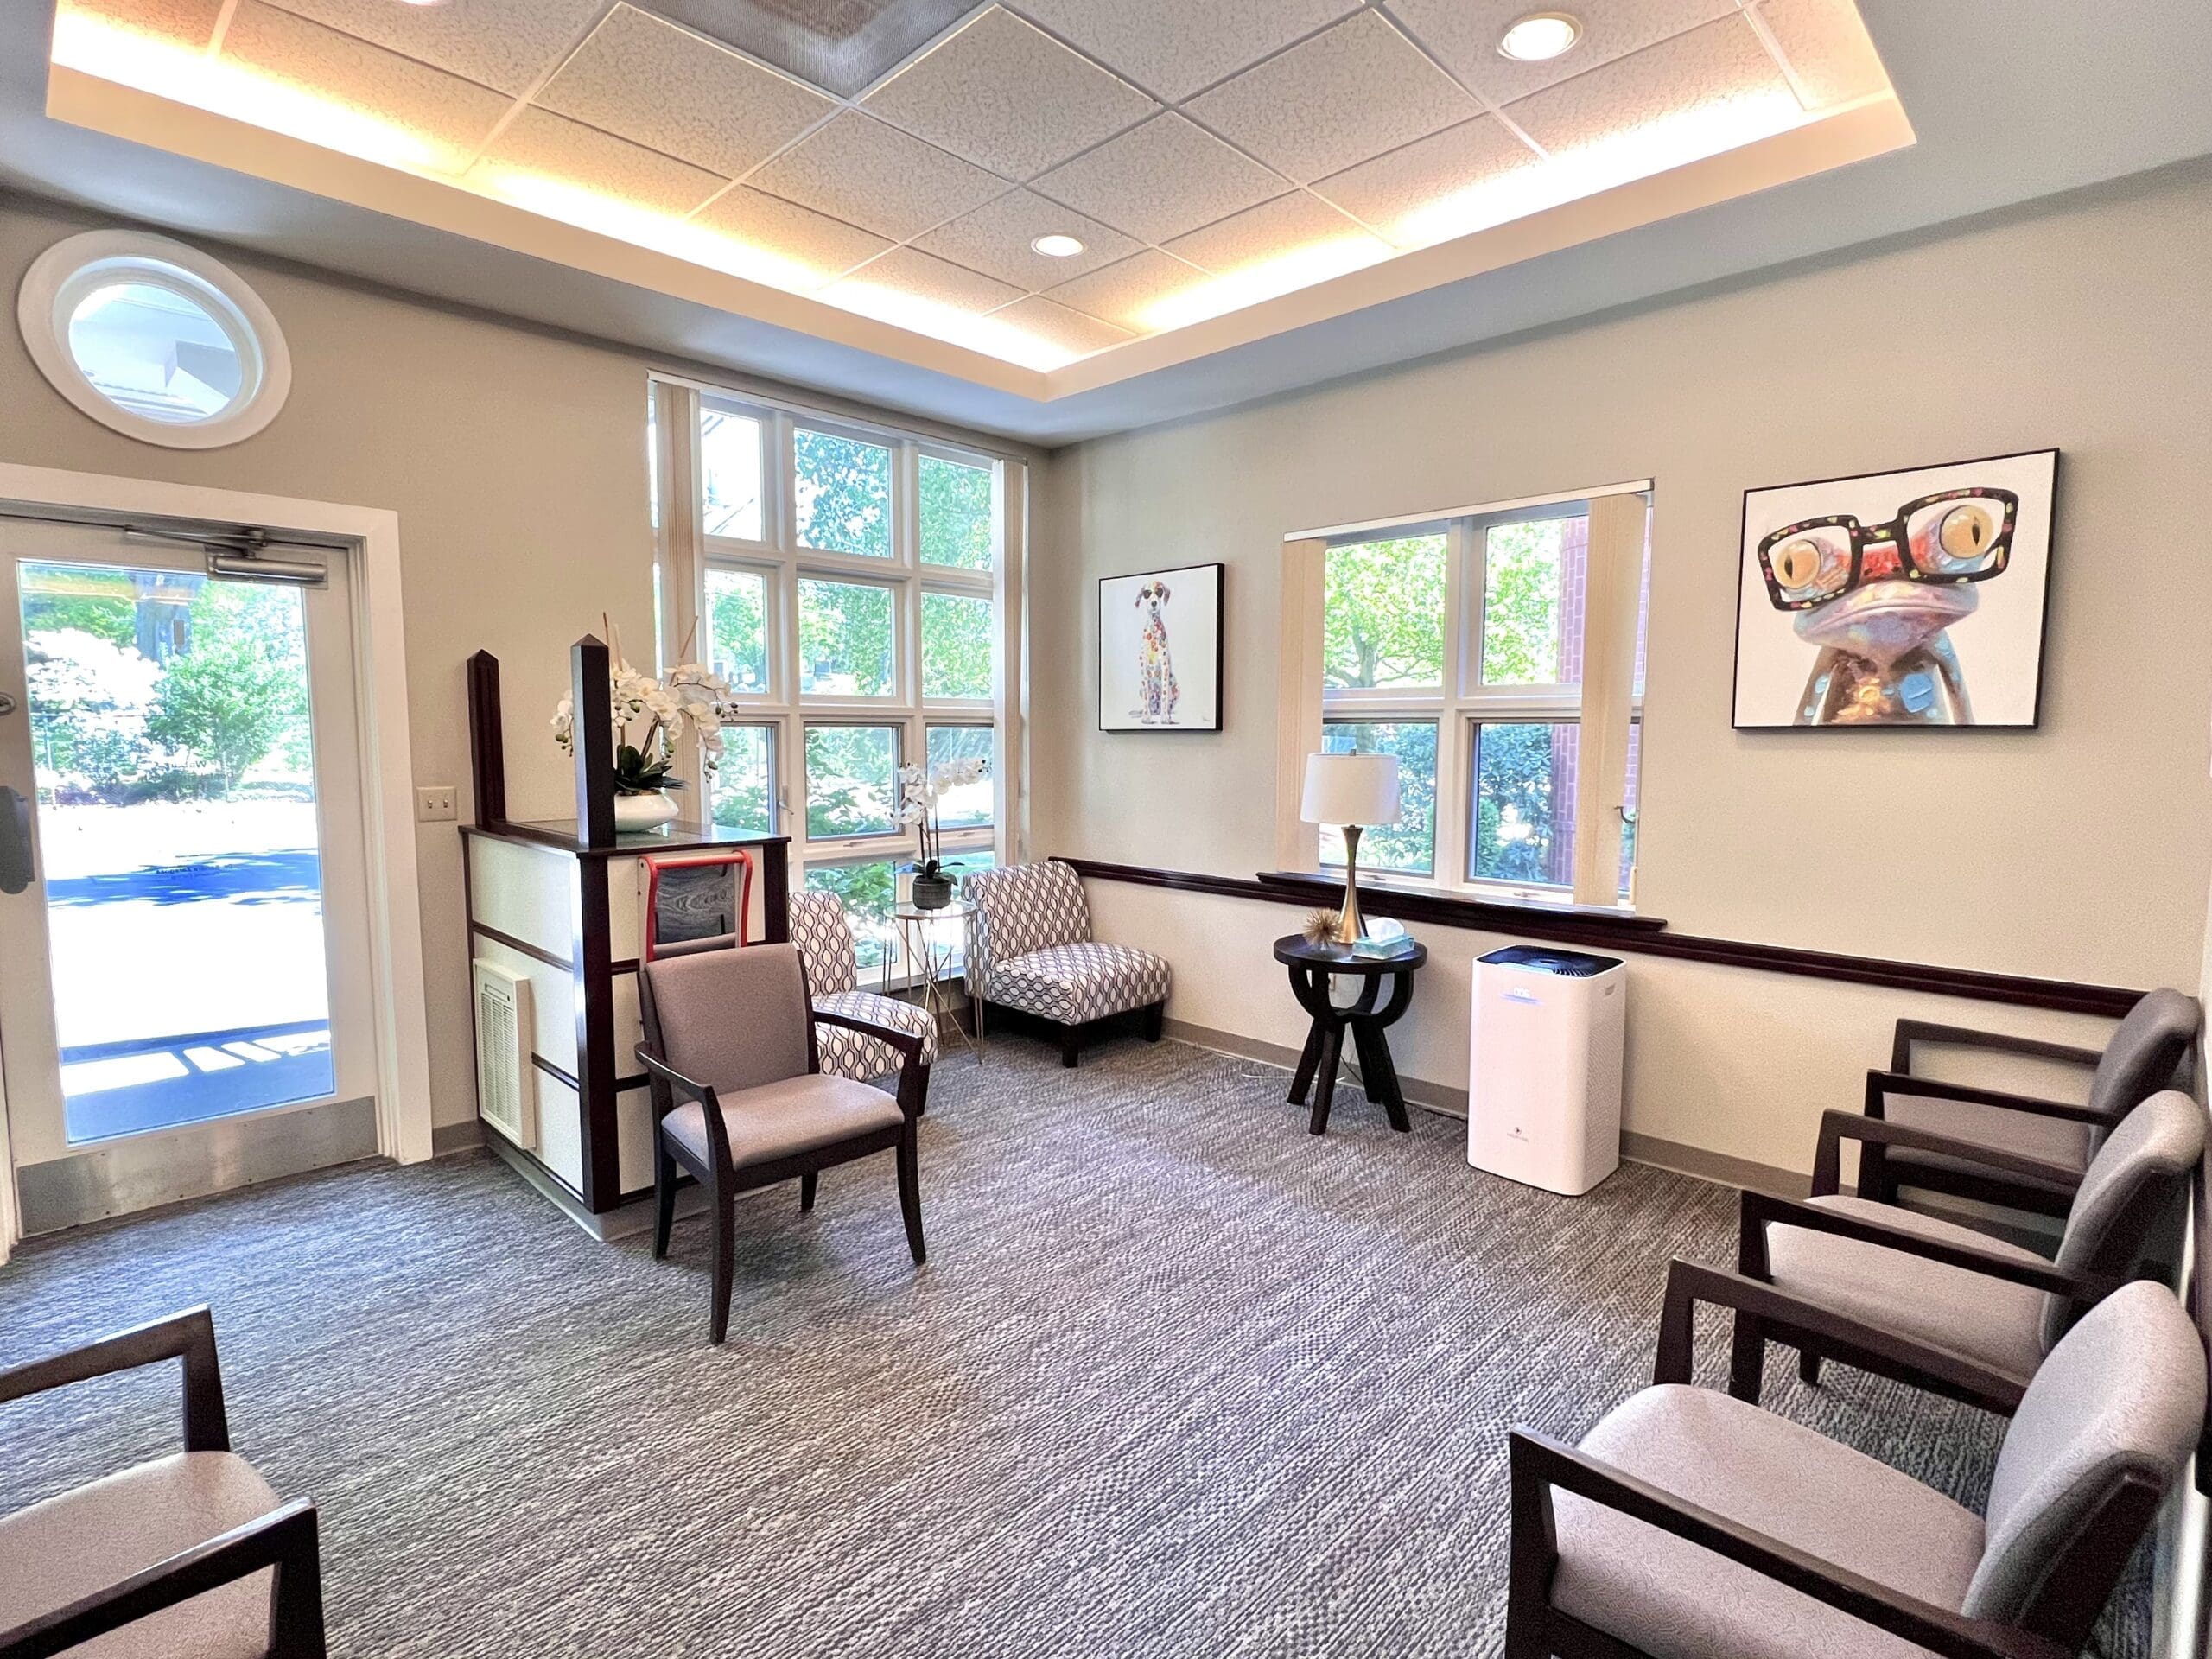 Comfortable waiting room at Waban Dental Group, serving Boston, Newton, and surrounding areas, designed for patient ease and relaxation.